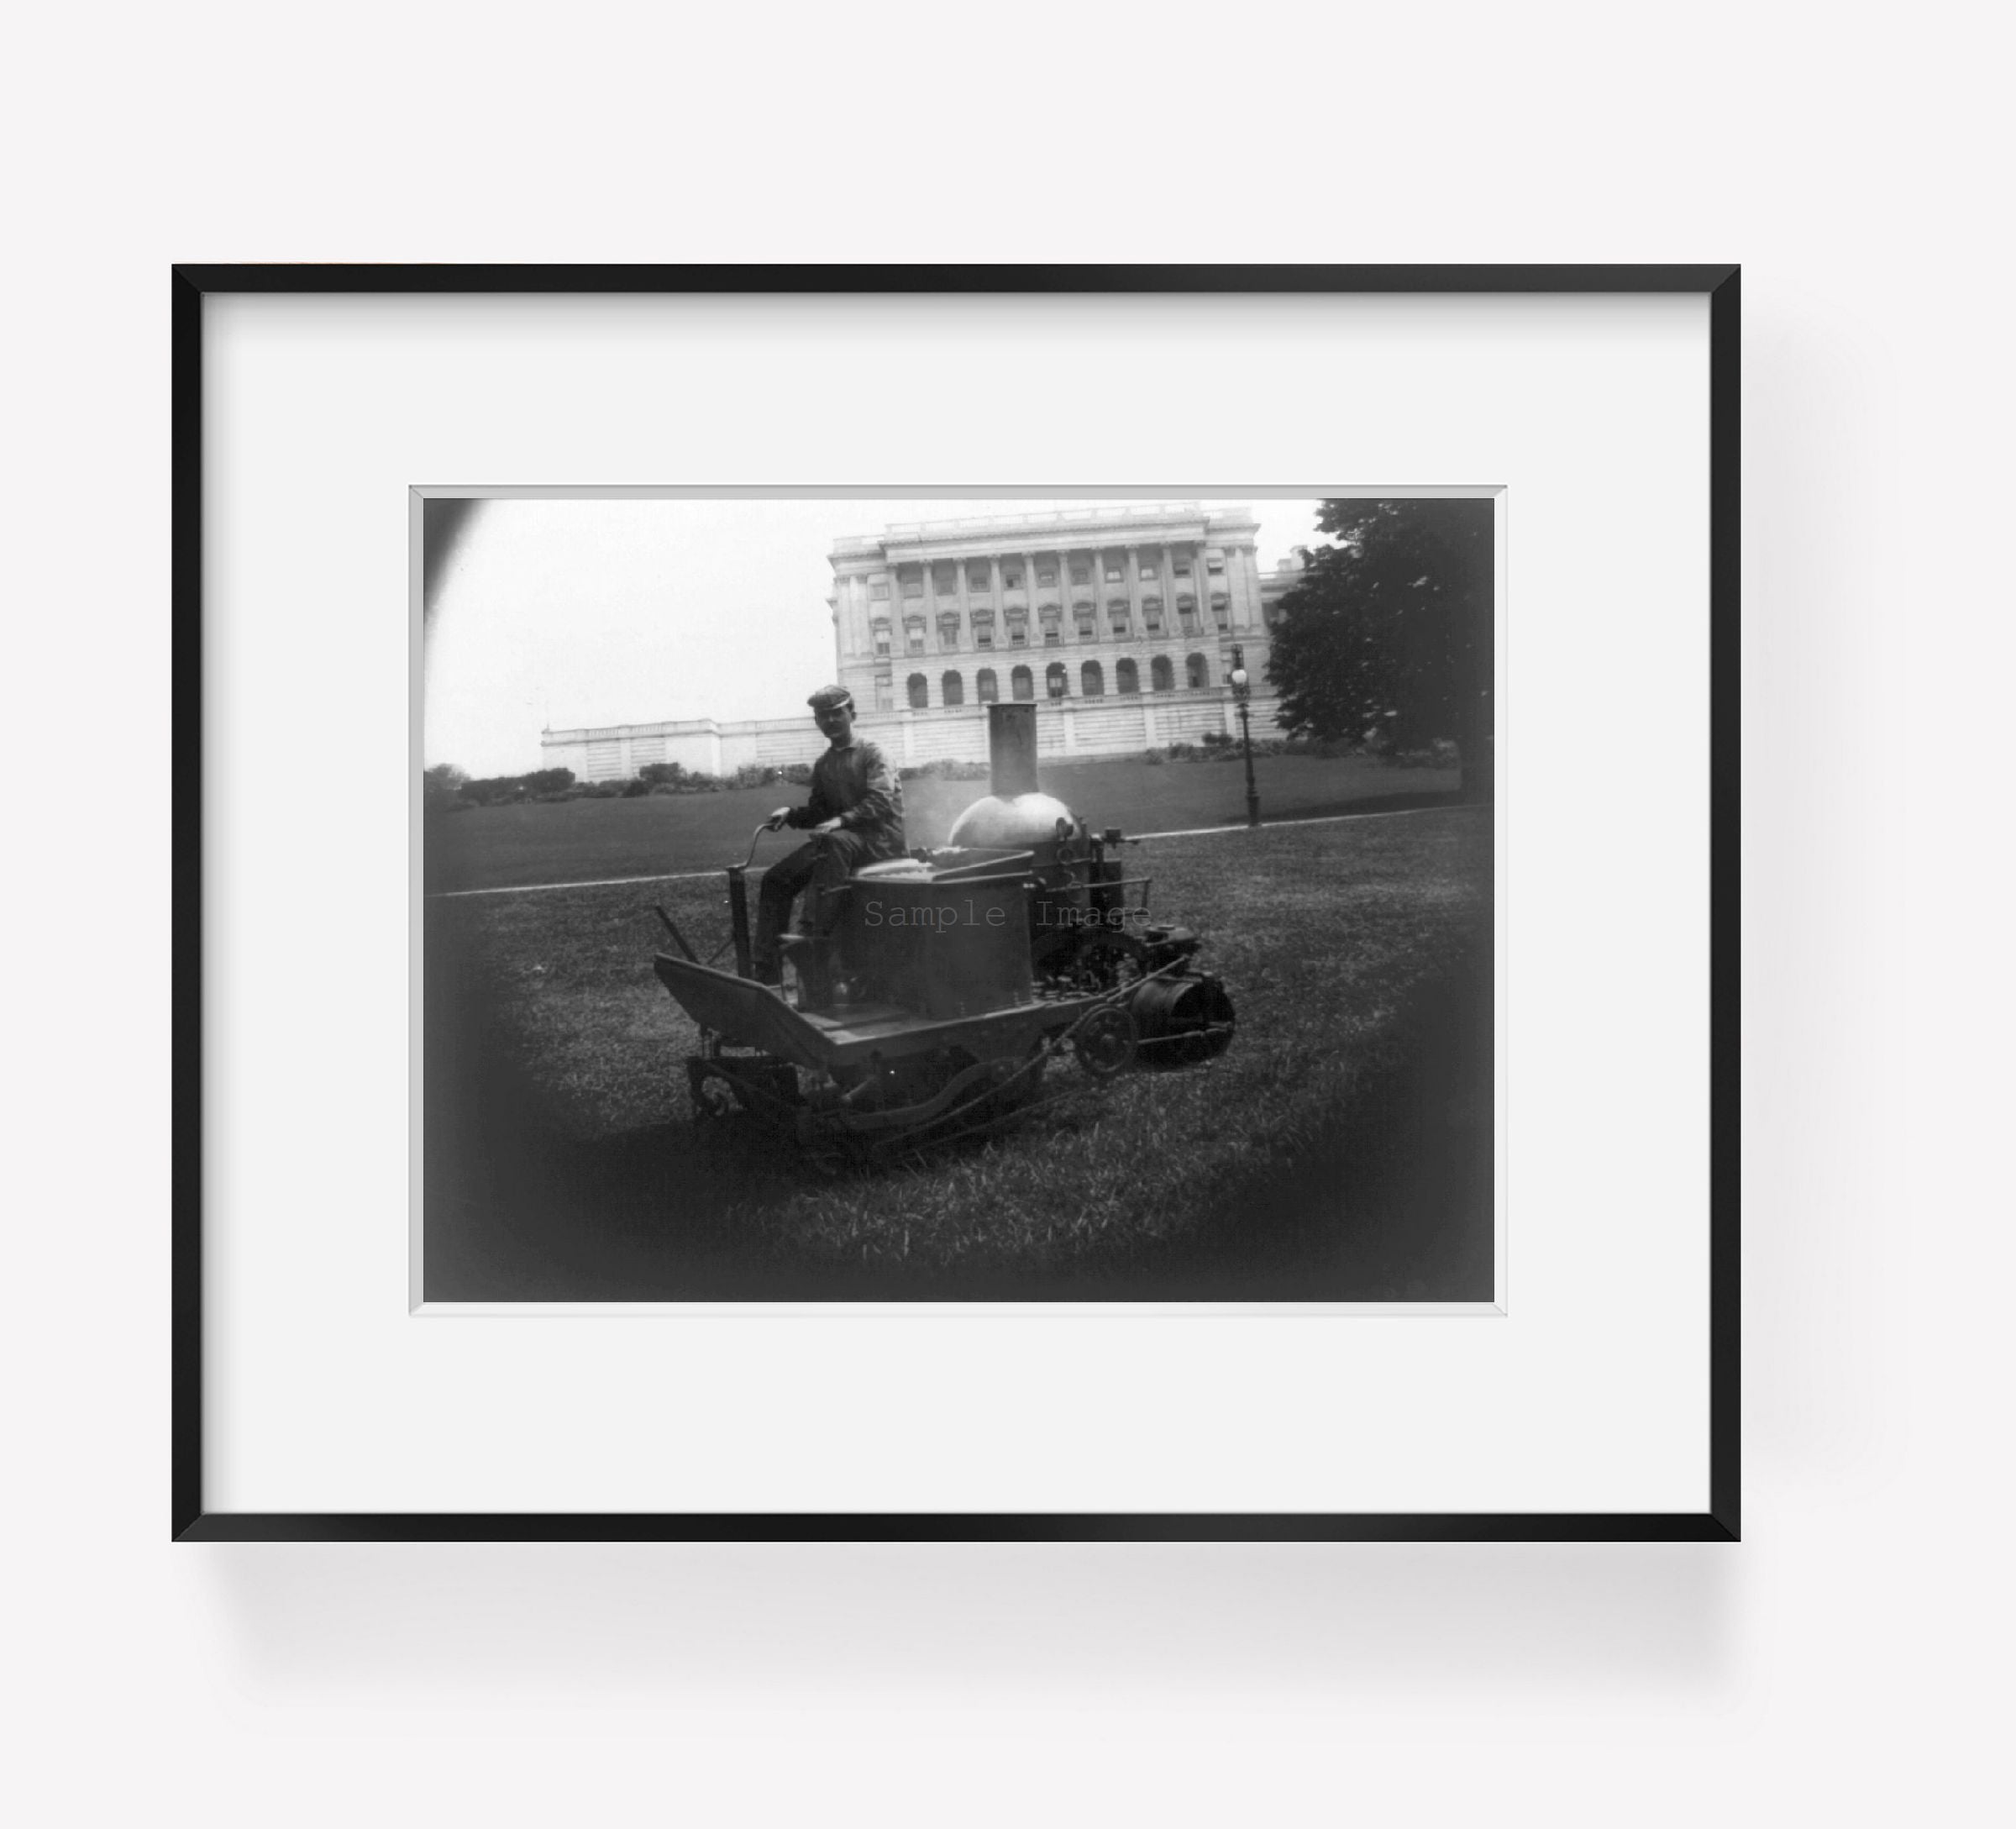 ca. 1903 photograph of Capitol grounds Summary: Man on steam-driven machine in f